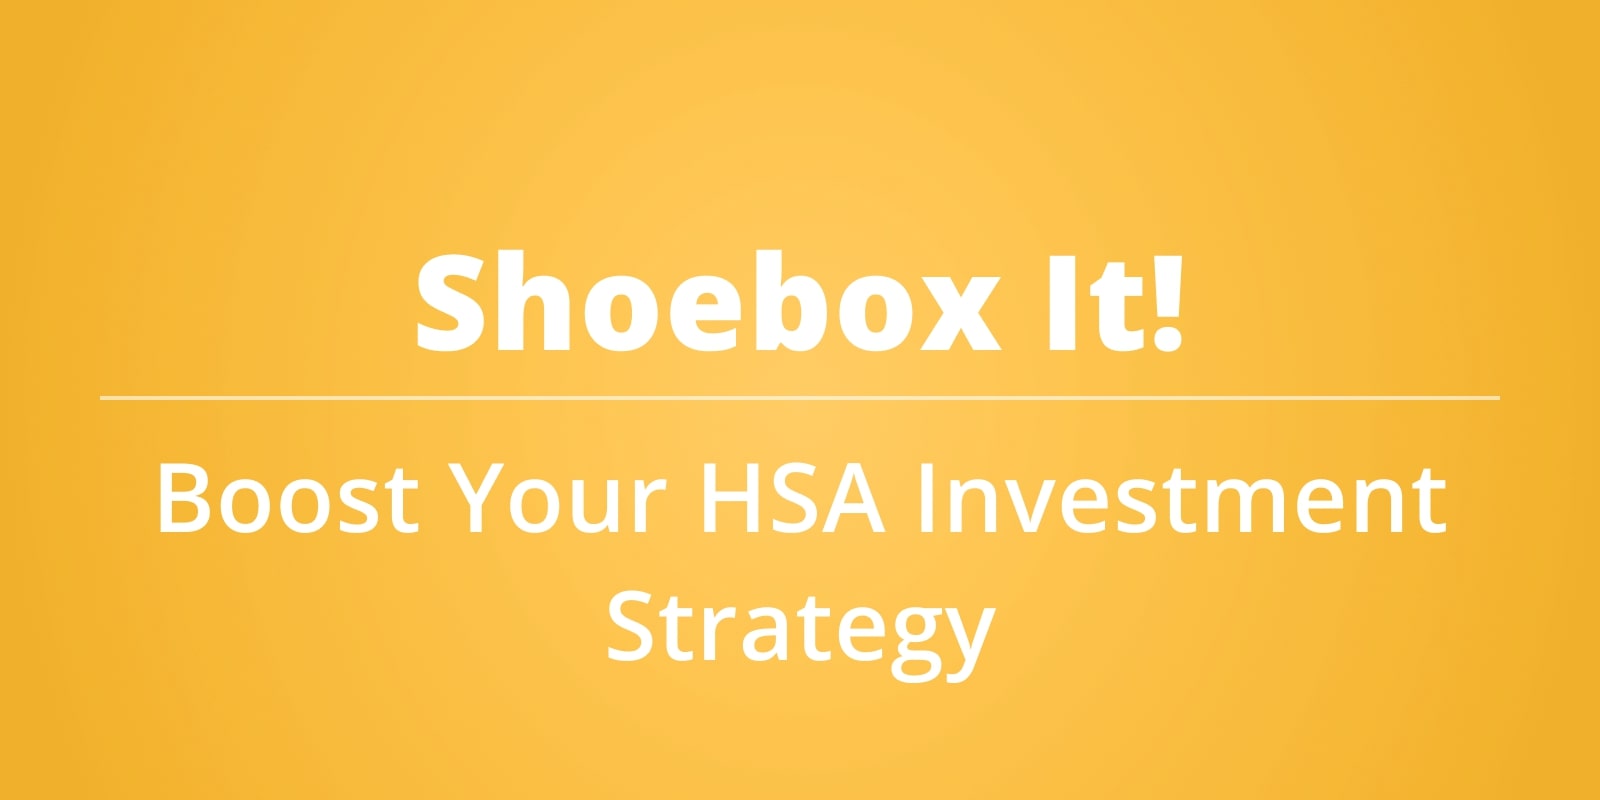 Shoebox It! Boost Your HSA Investment Strategy